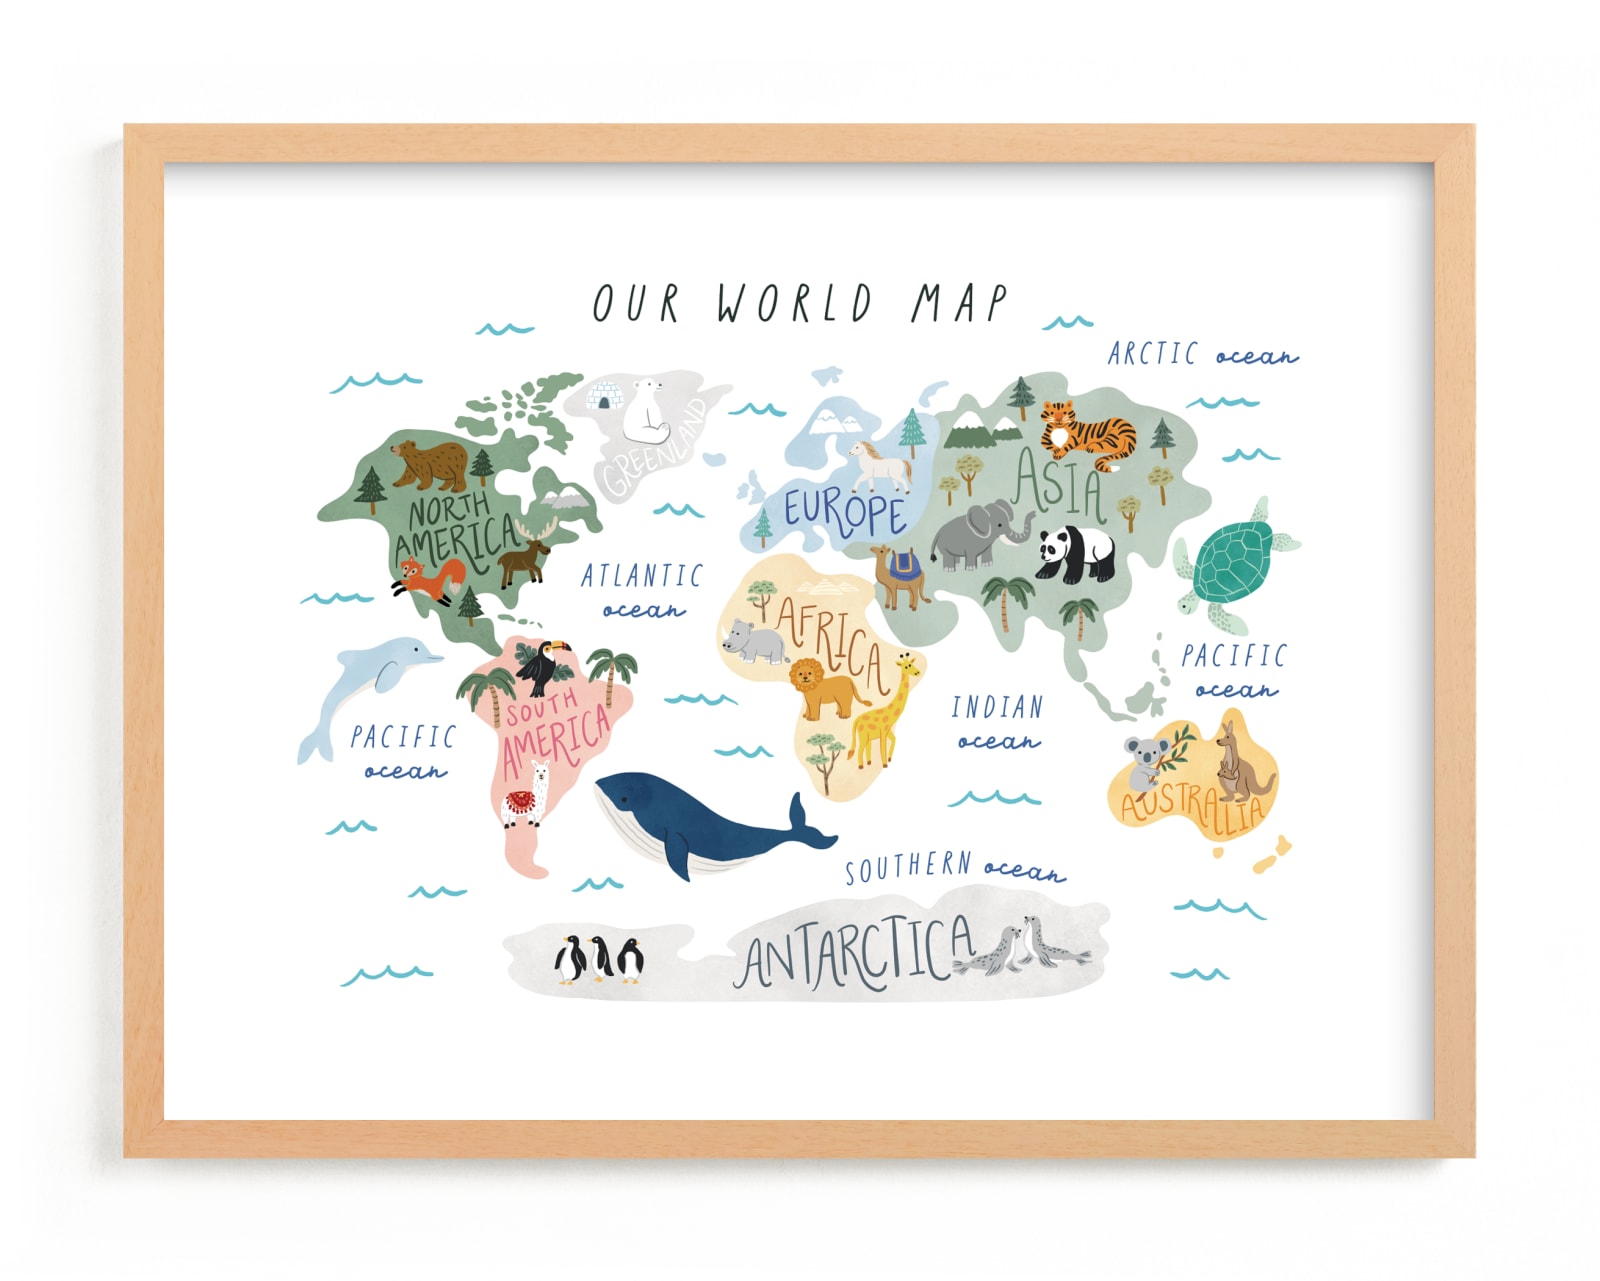 Our World Map by Elly